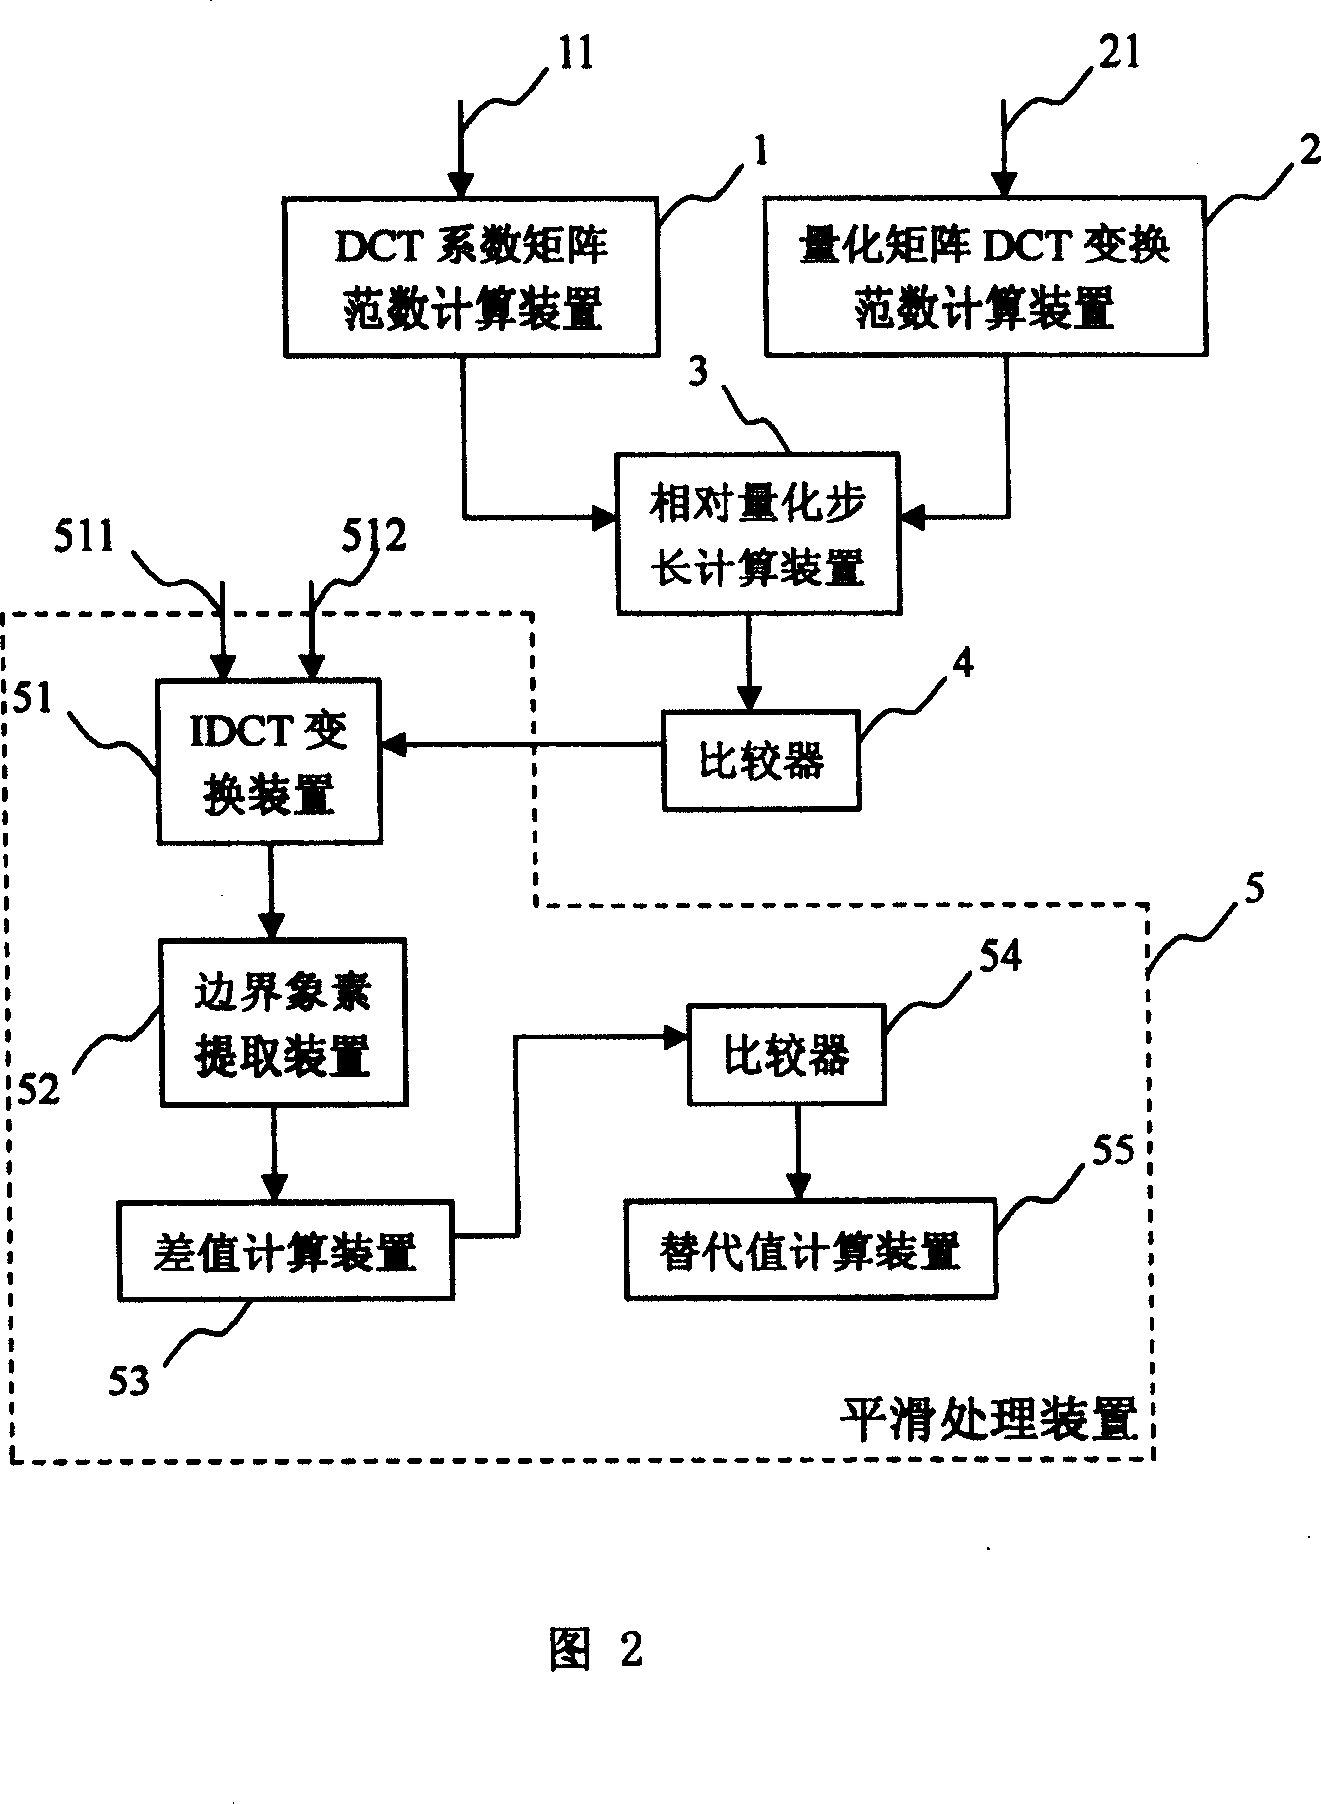 Method and device for removing block effect in video coding-decoding system